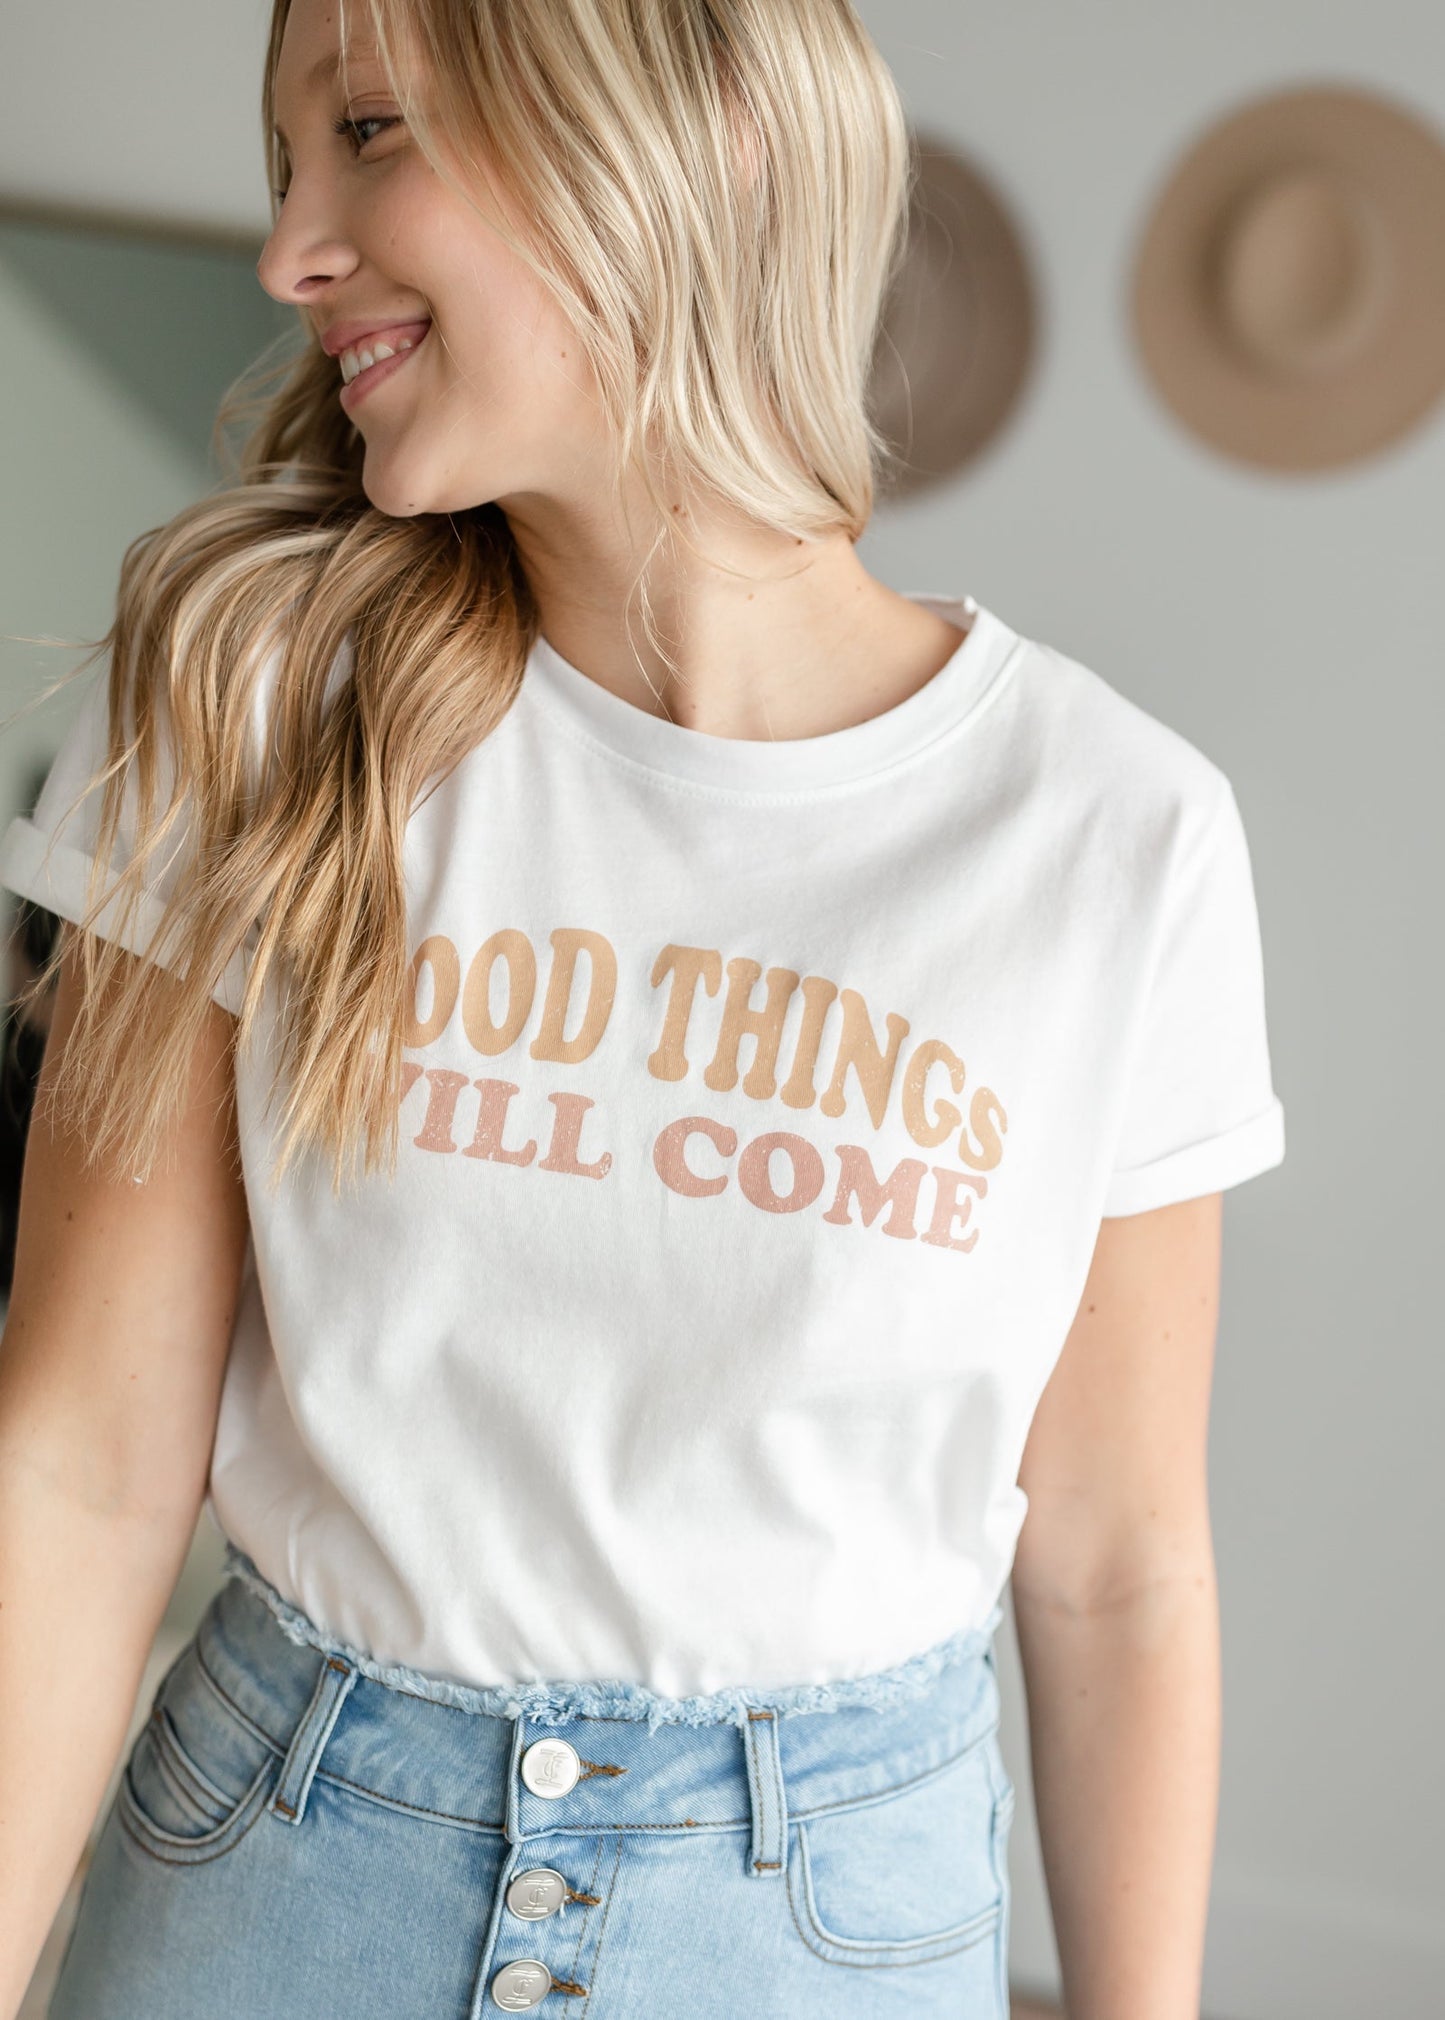 Good Things Will Come Graphic Tee Shirt Tres Bien